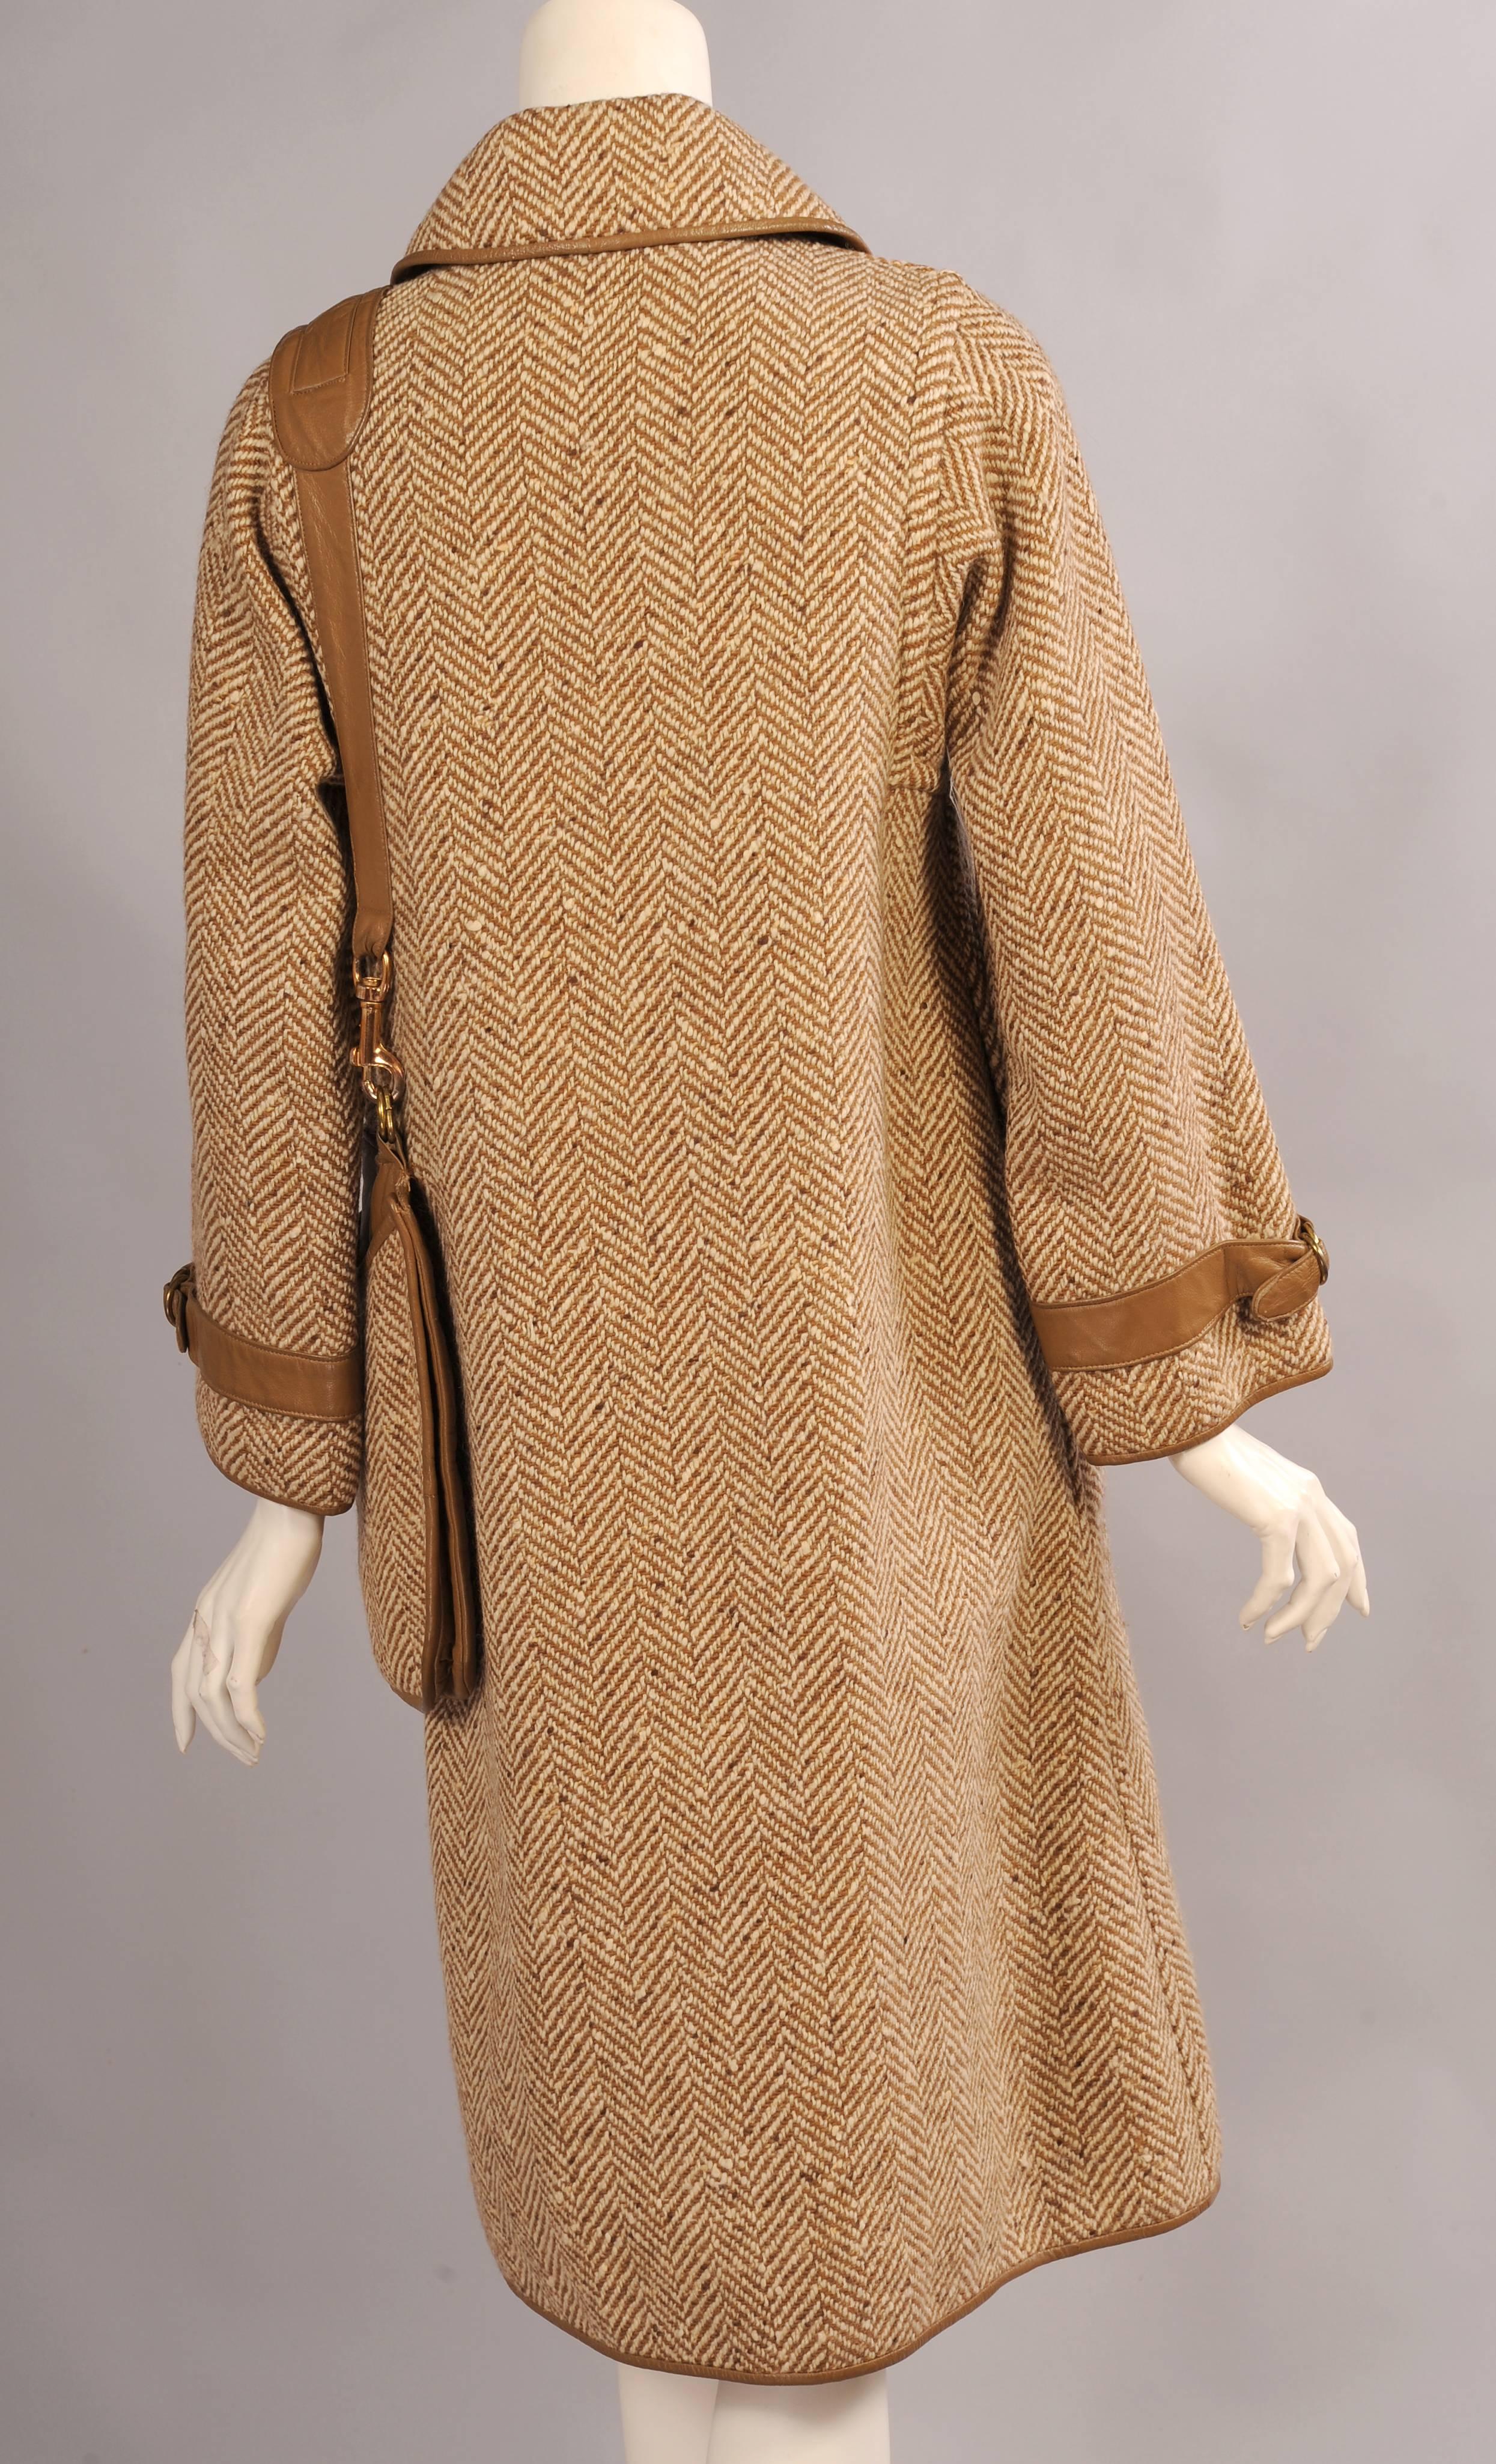 Brown Bonnie Cashin for Sills Leather Trimmed Wool Coat with Attached Shoulder Bag